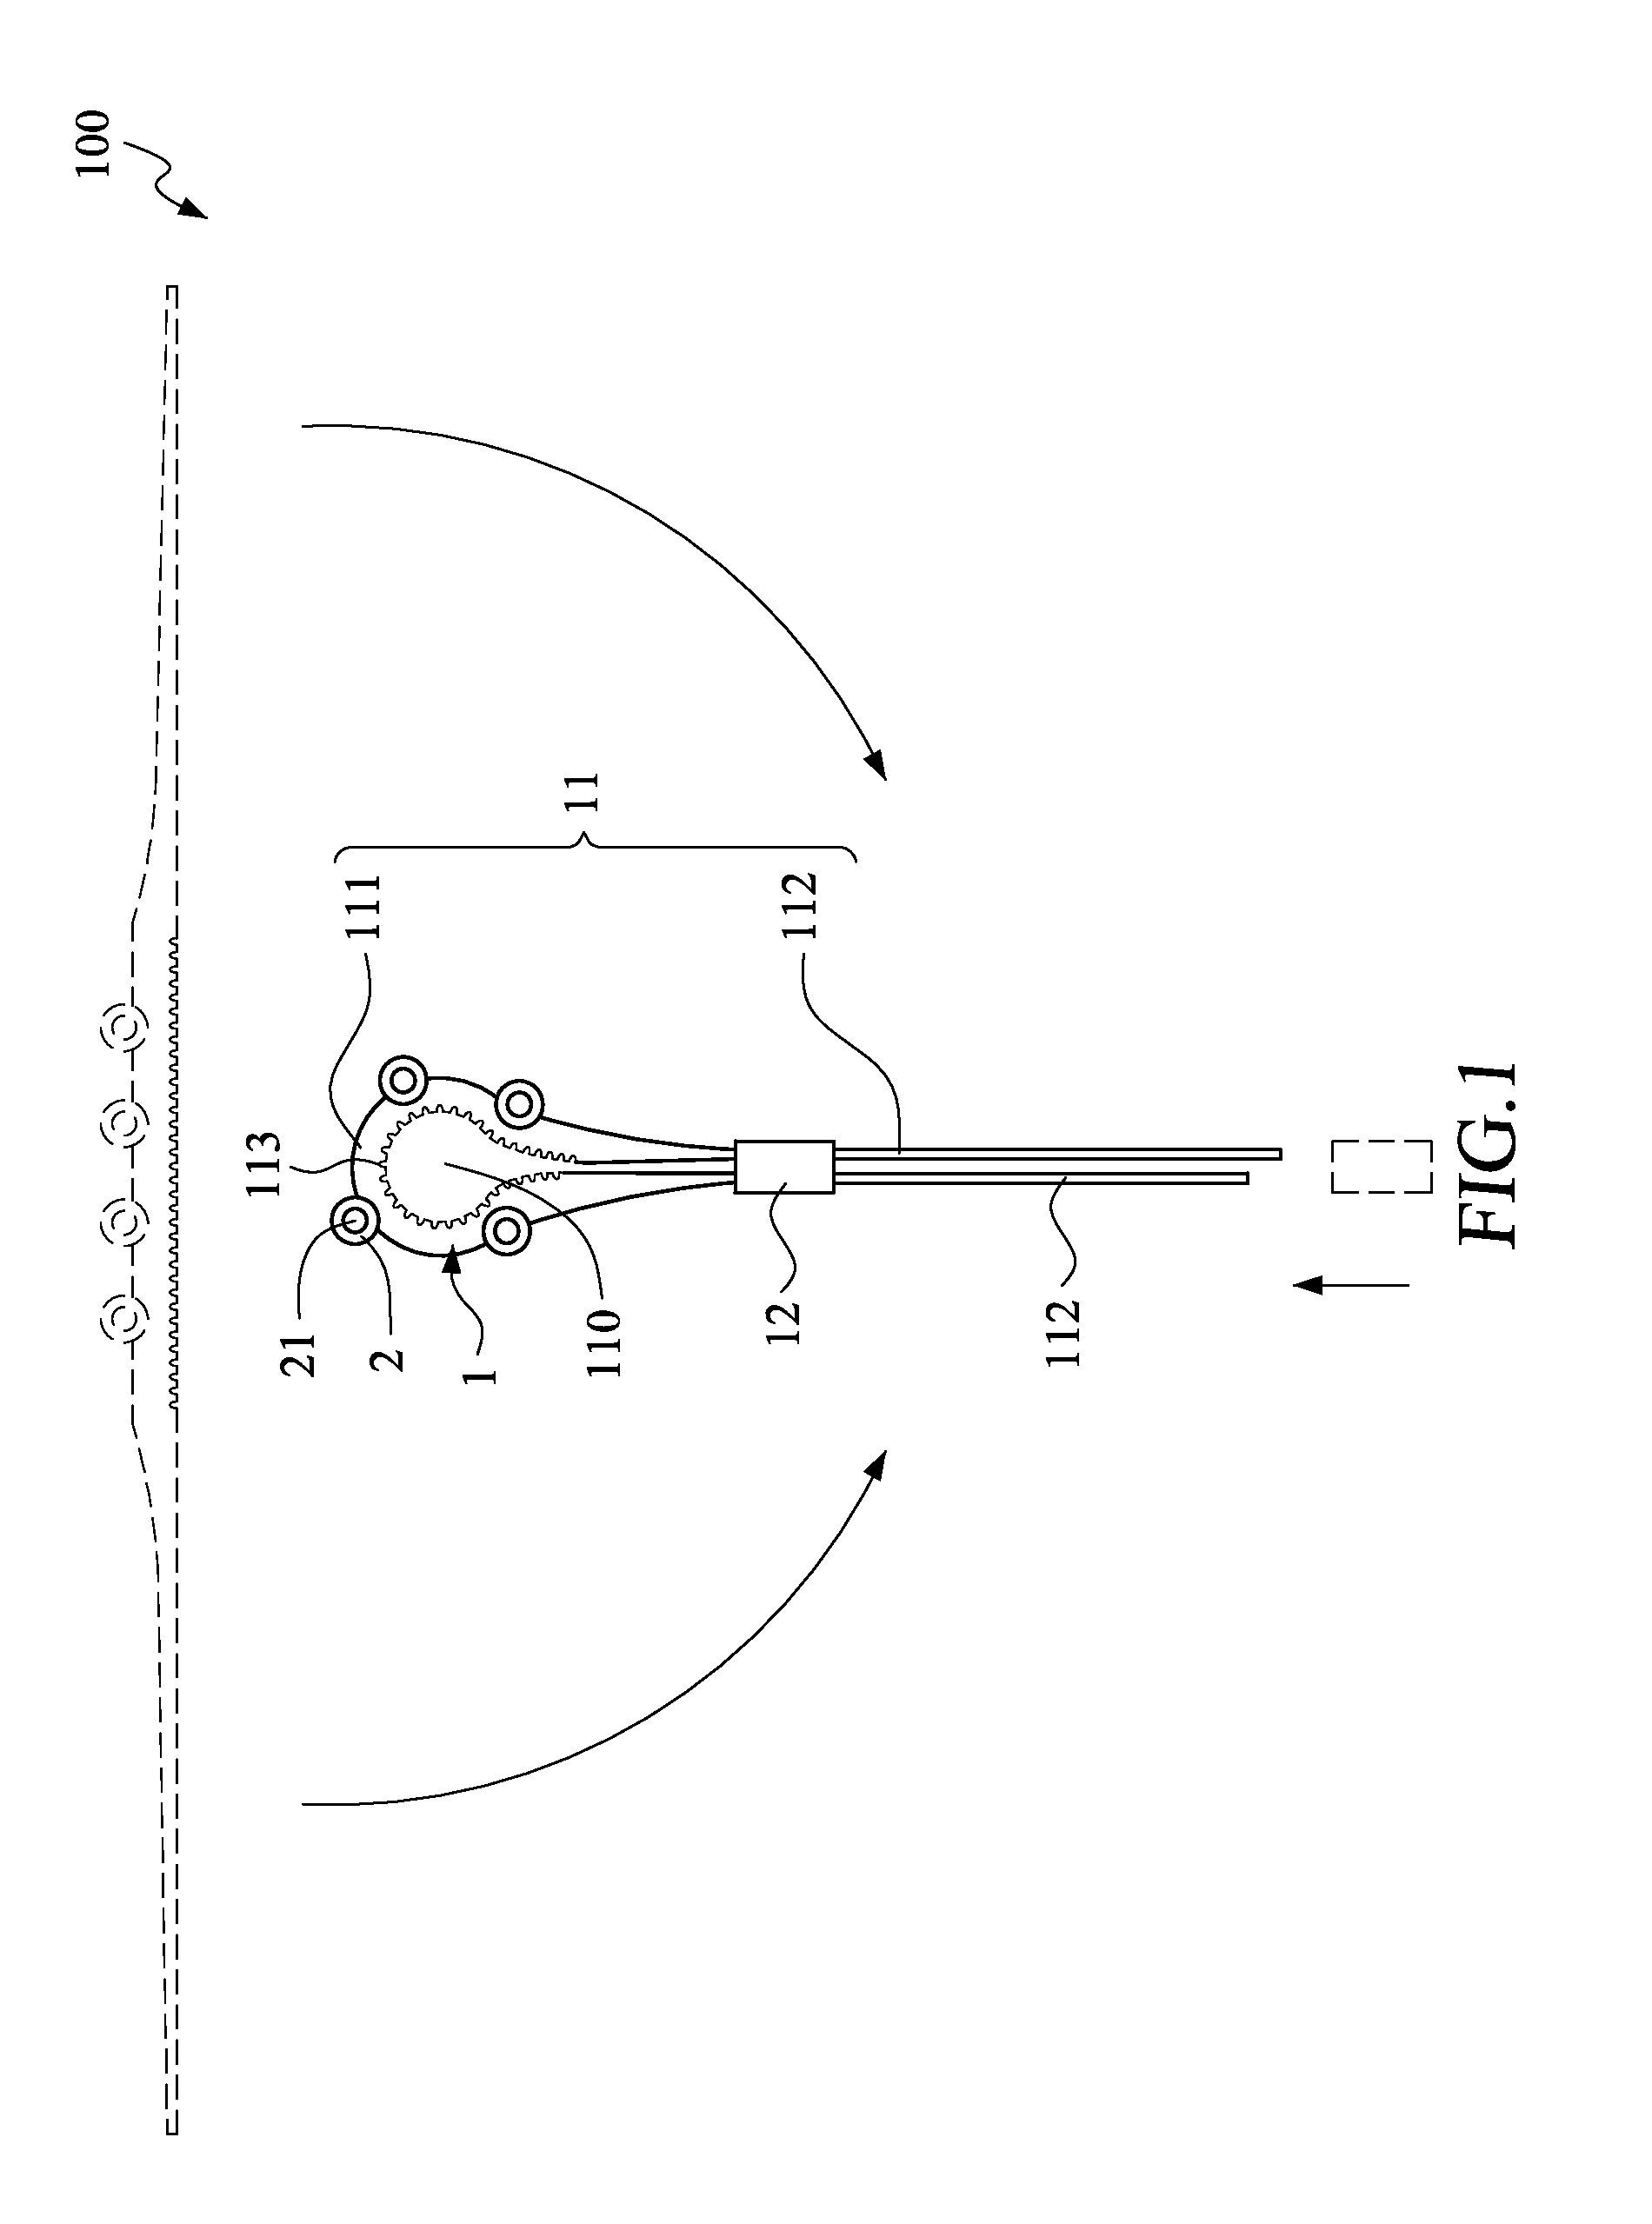 Adjustable attaching lens device